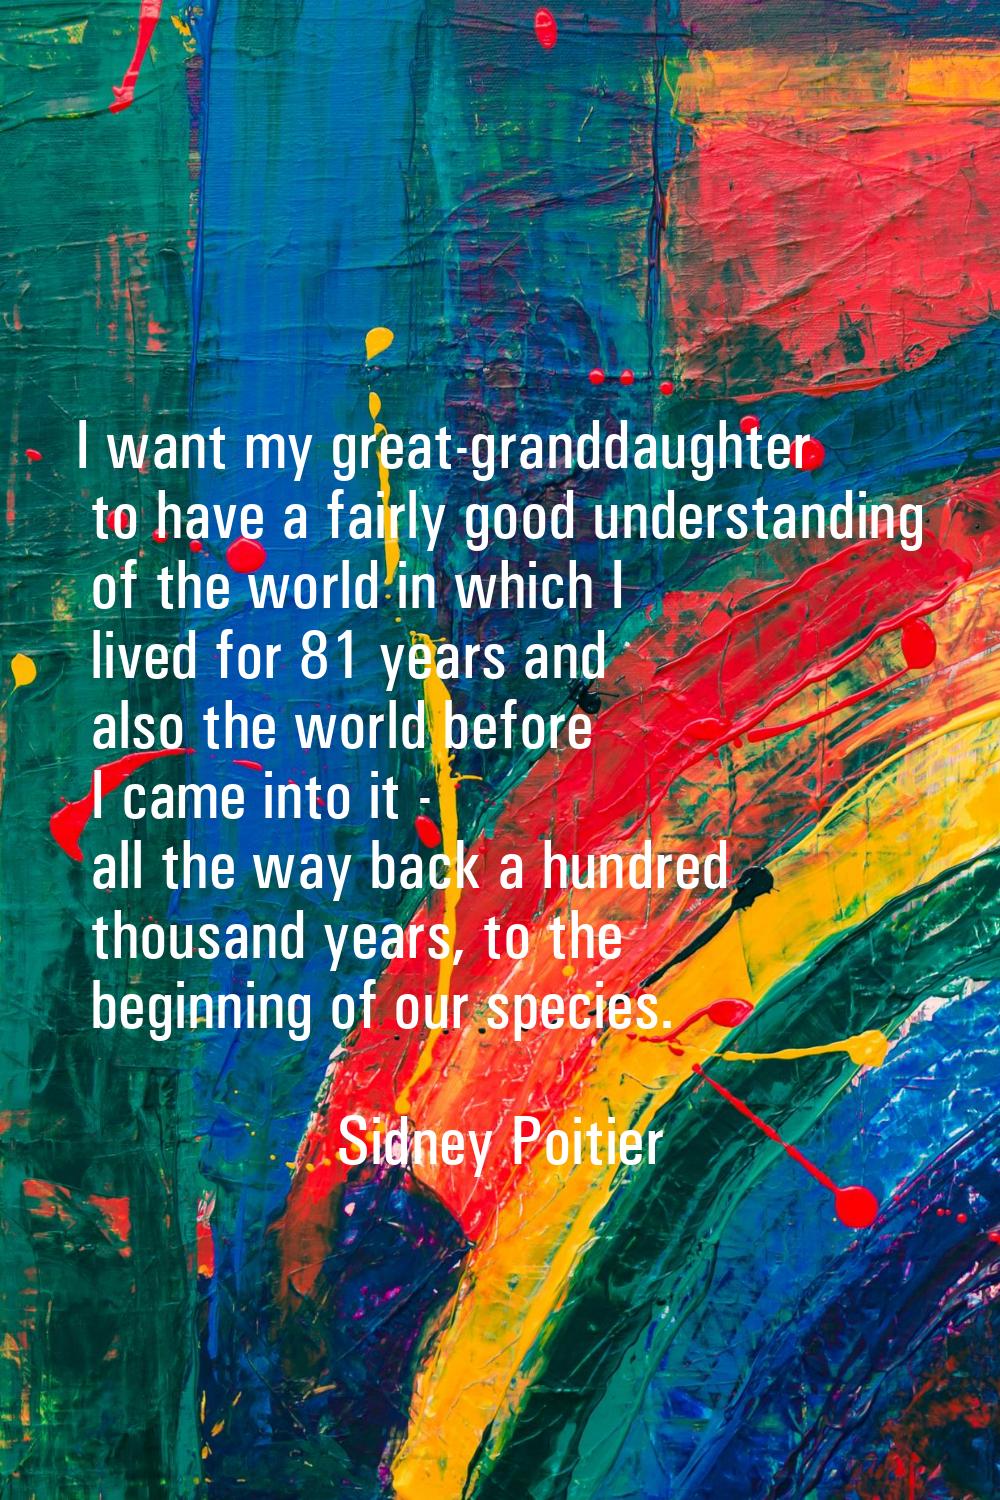 I want my great-granddaughter to have a fairly good understanding of the world in which I lived for